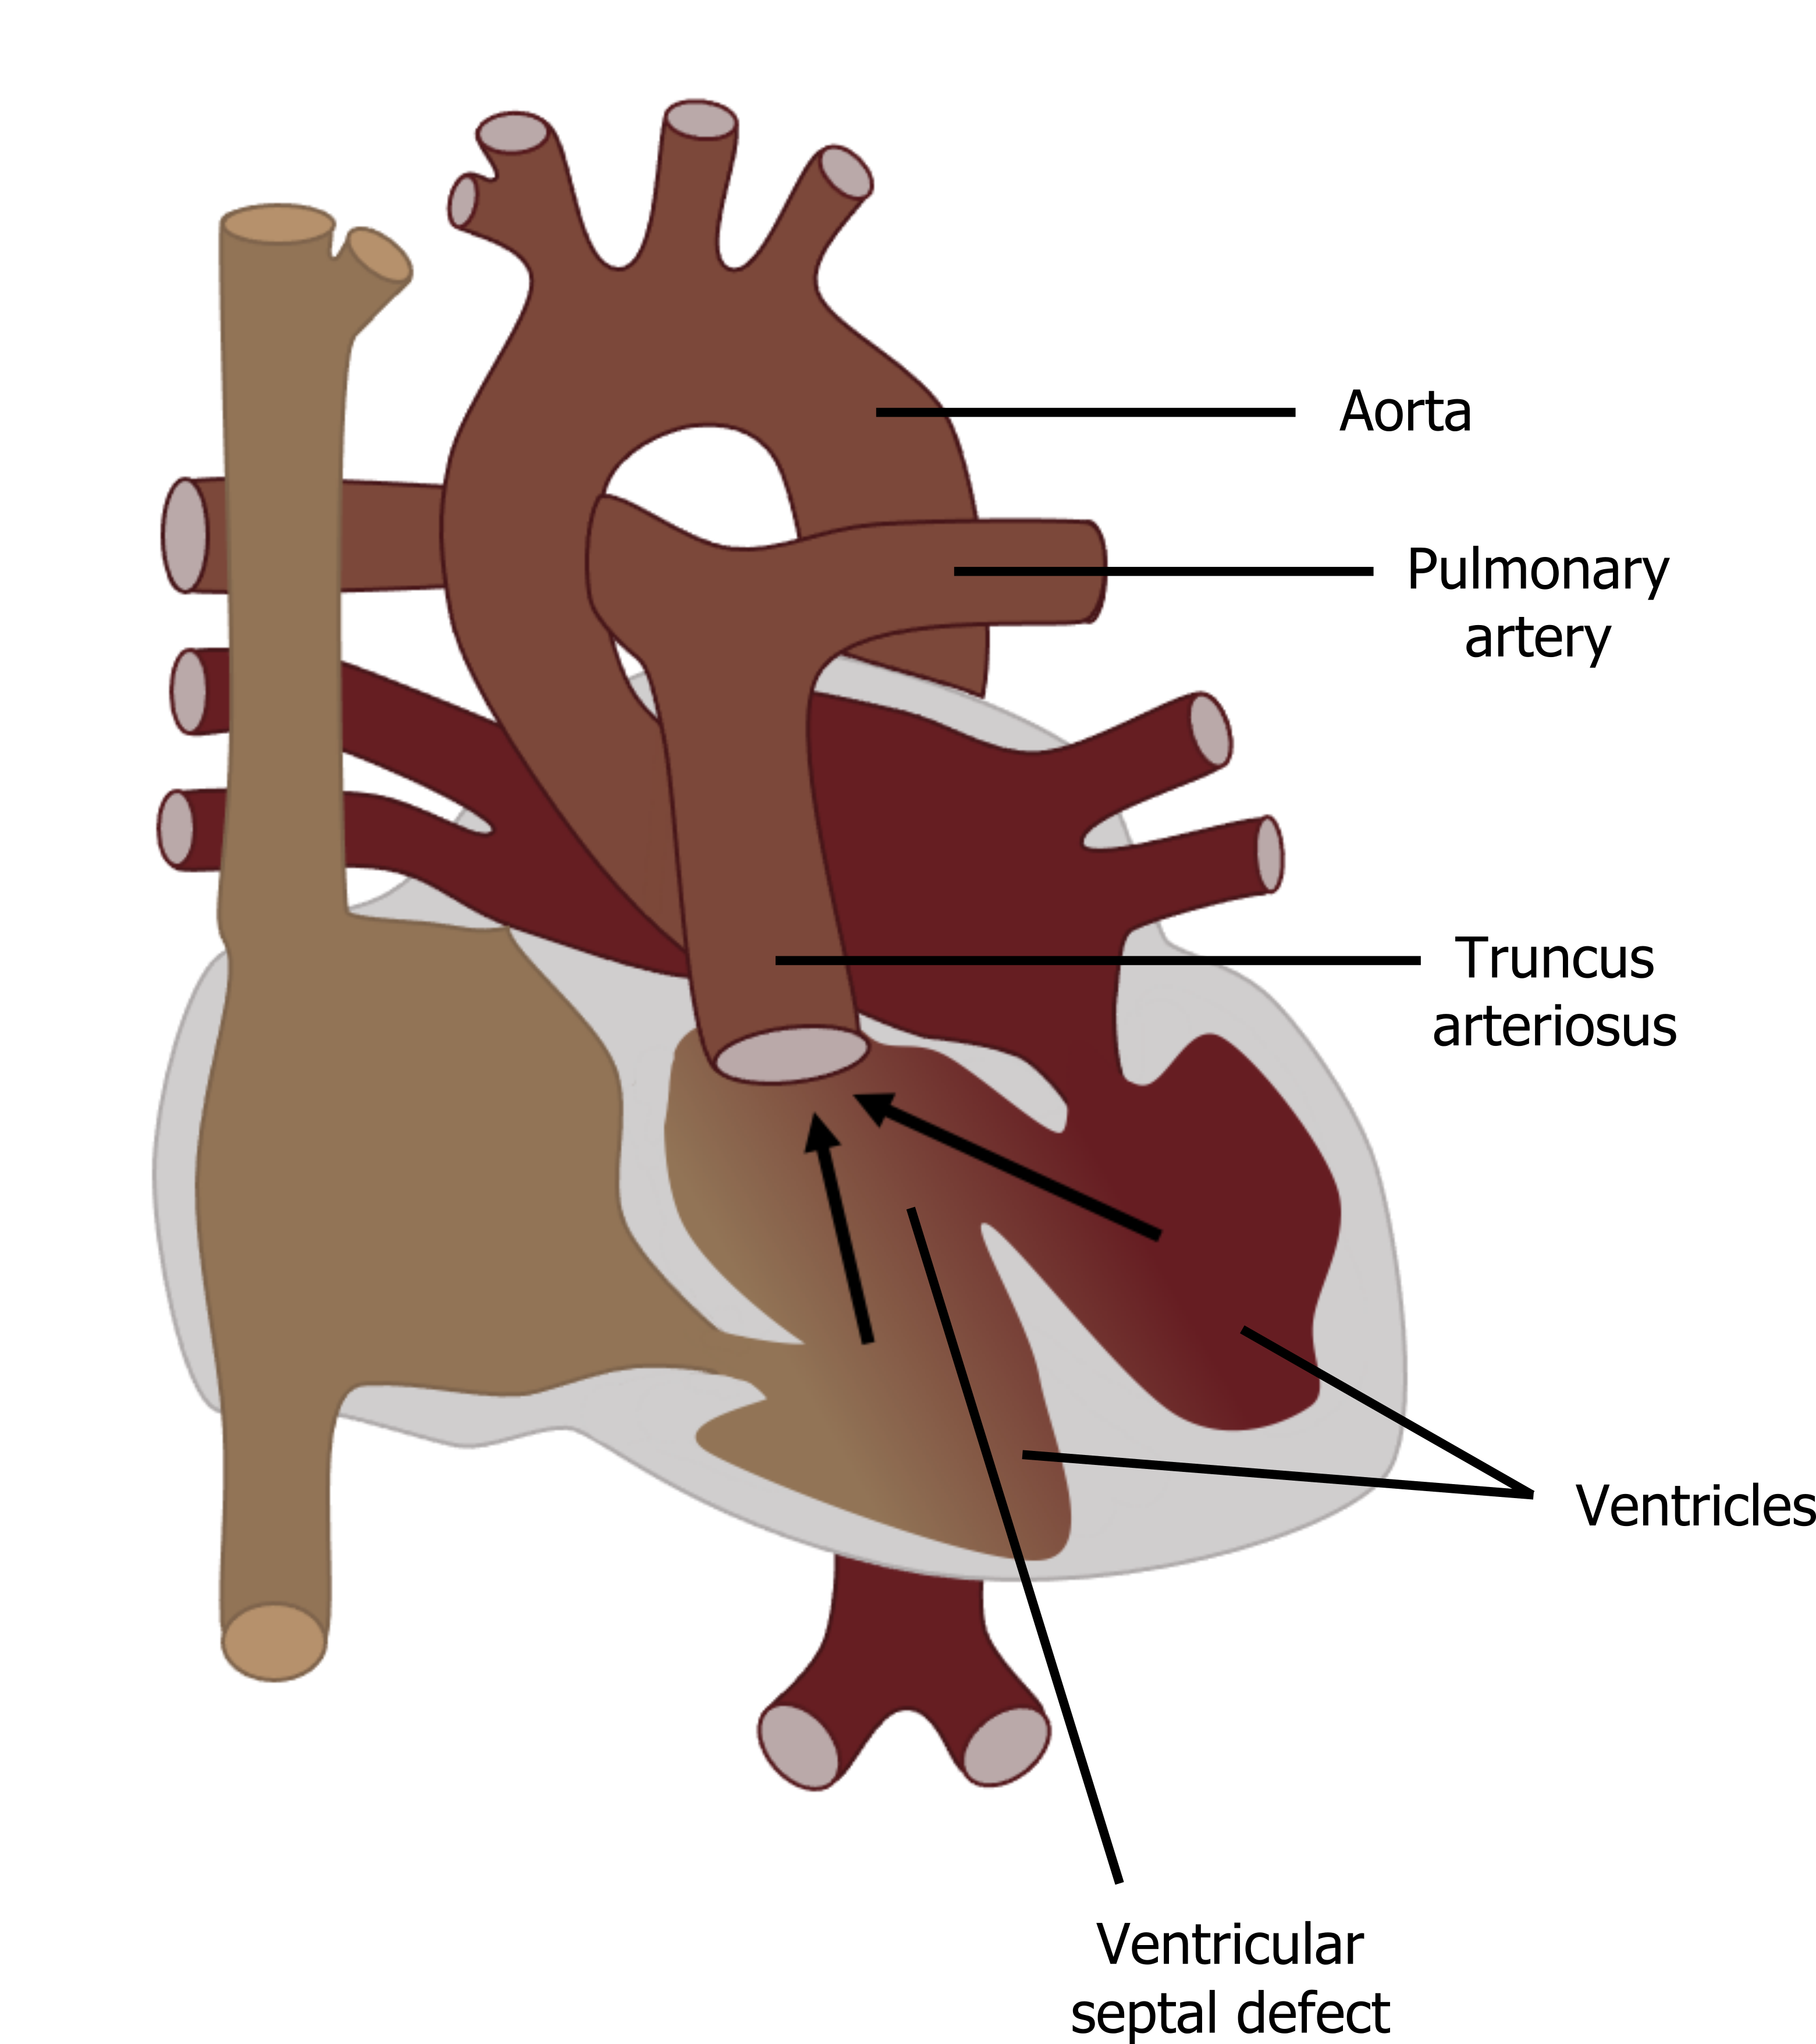 A diagram of the circulatory pathway through the heart is labelled with 'truncus arteriosus'. The label points to a single vessel made of a combined pulmonary artery and aorta. Also present is a ventricular septal defect. The relative positions of the truncus arteriosus and septal defect means blood from both ventricles can simultaneously enter the single vessel and this is indicated by two arrows that lead from the two ventricular chambers into the single vessel.